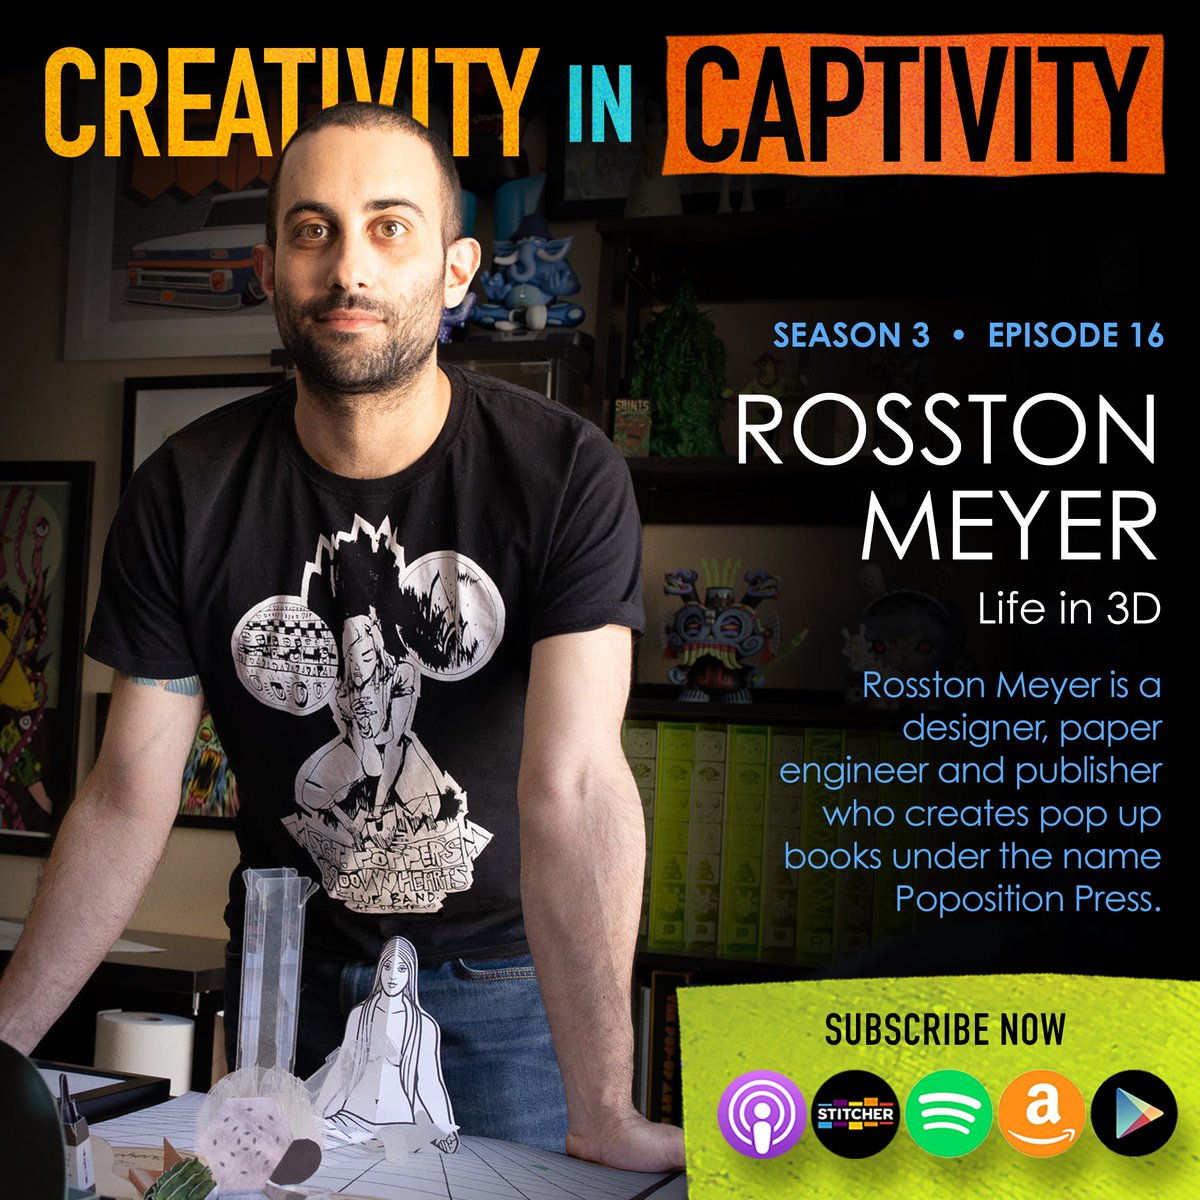 I speak with @pathazell on his Creativity in Captivity podcast today about my adventures in publishing! Listen to 'Life in 3D' at creativityincaptivity.fun on Apple Podcasts, Spotify, or wherever else you get your podcasts. #podcast #publishing #popupbooks #creativity #books